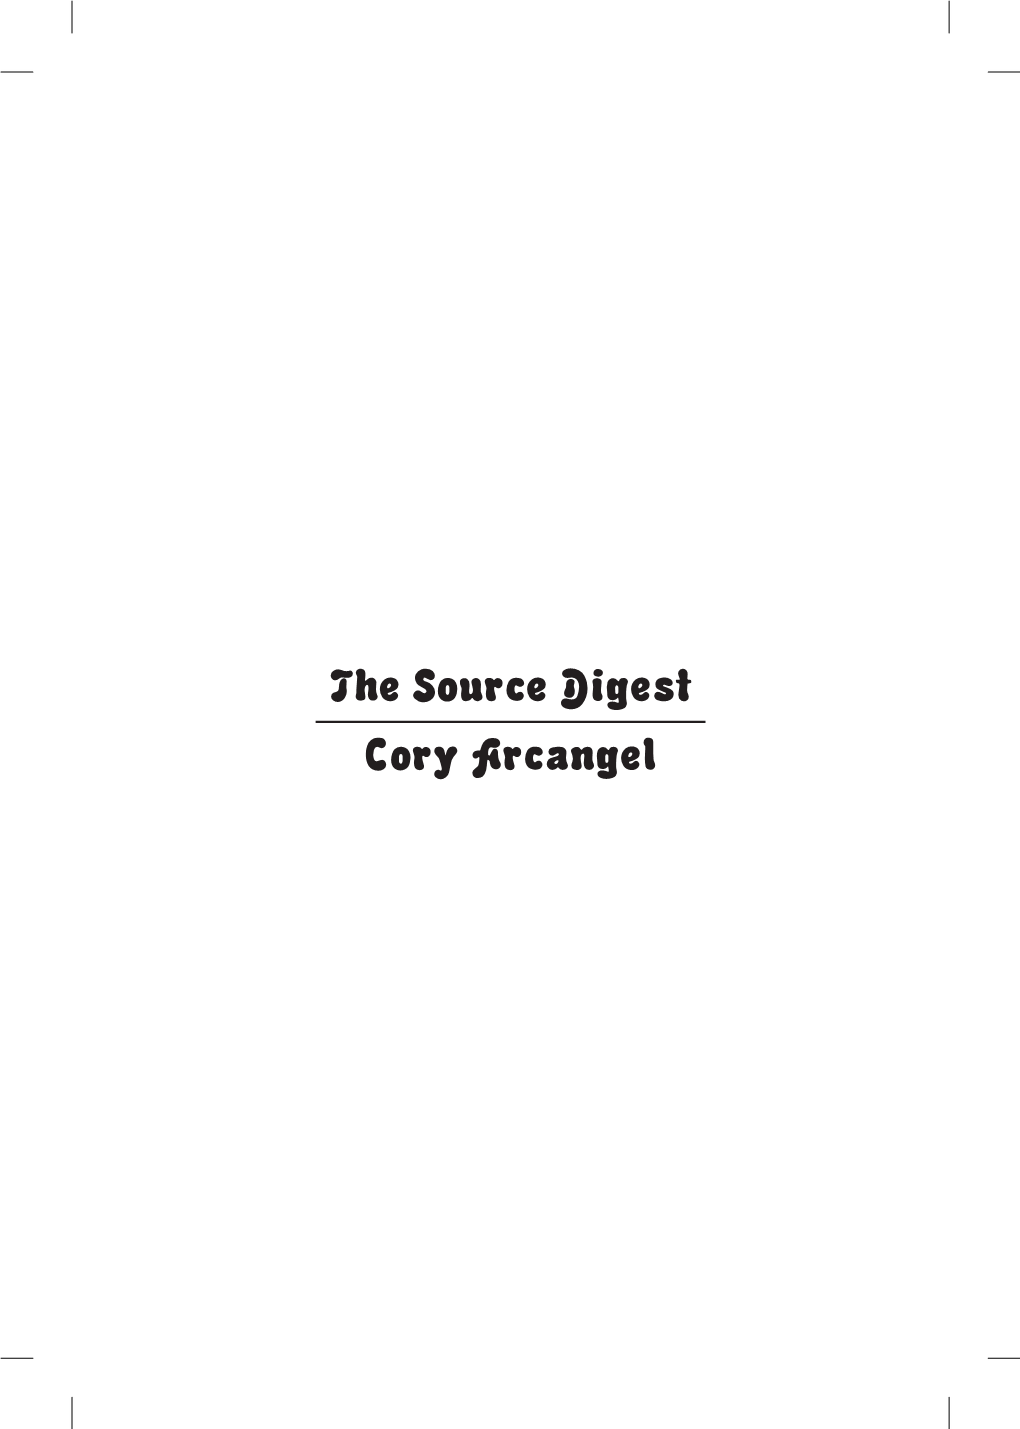 The Source Digest Cory Arcangel Also by Cory Arcangel